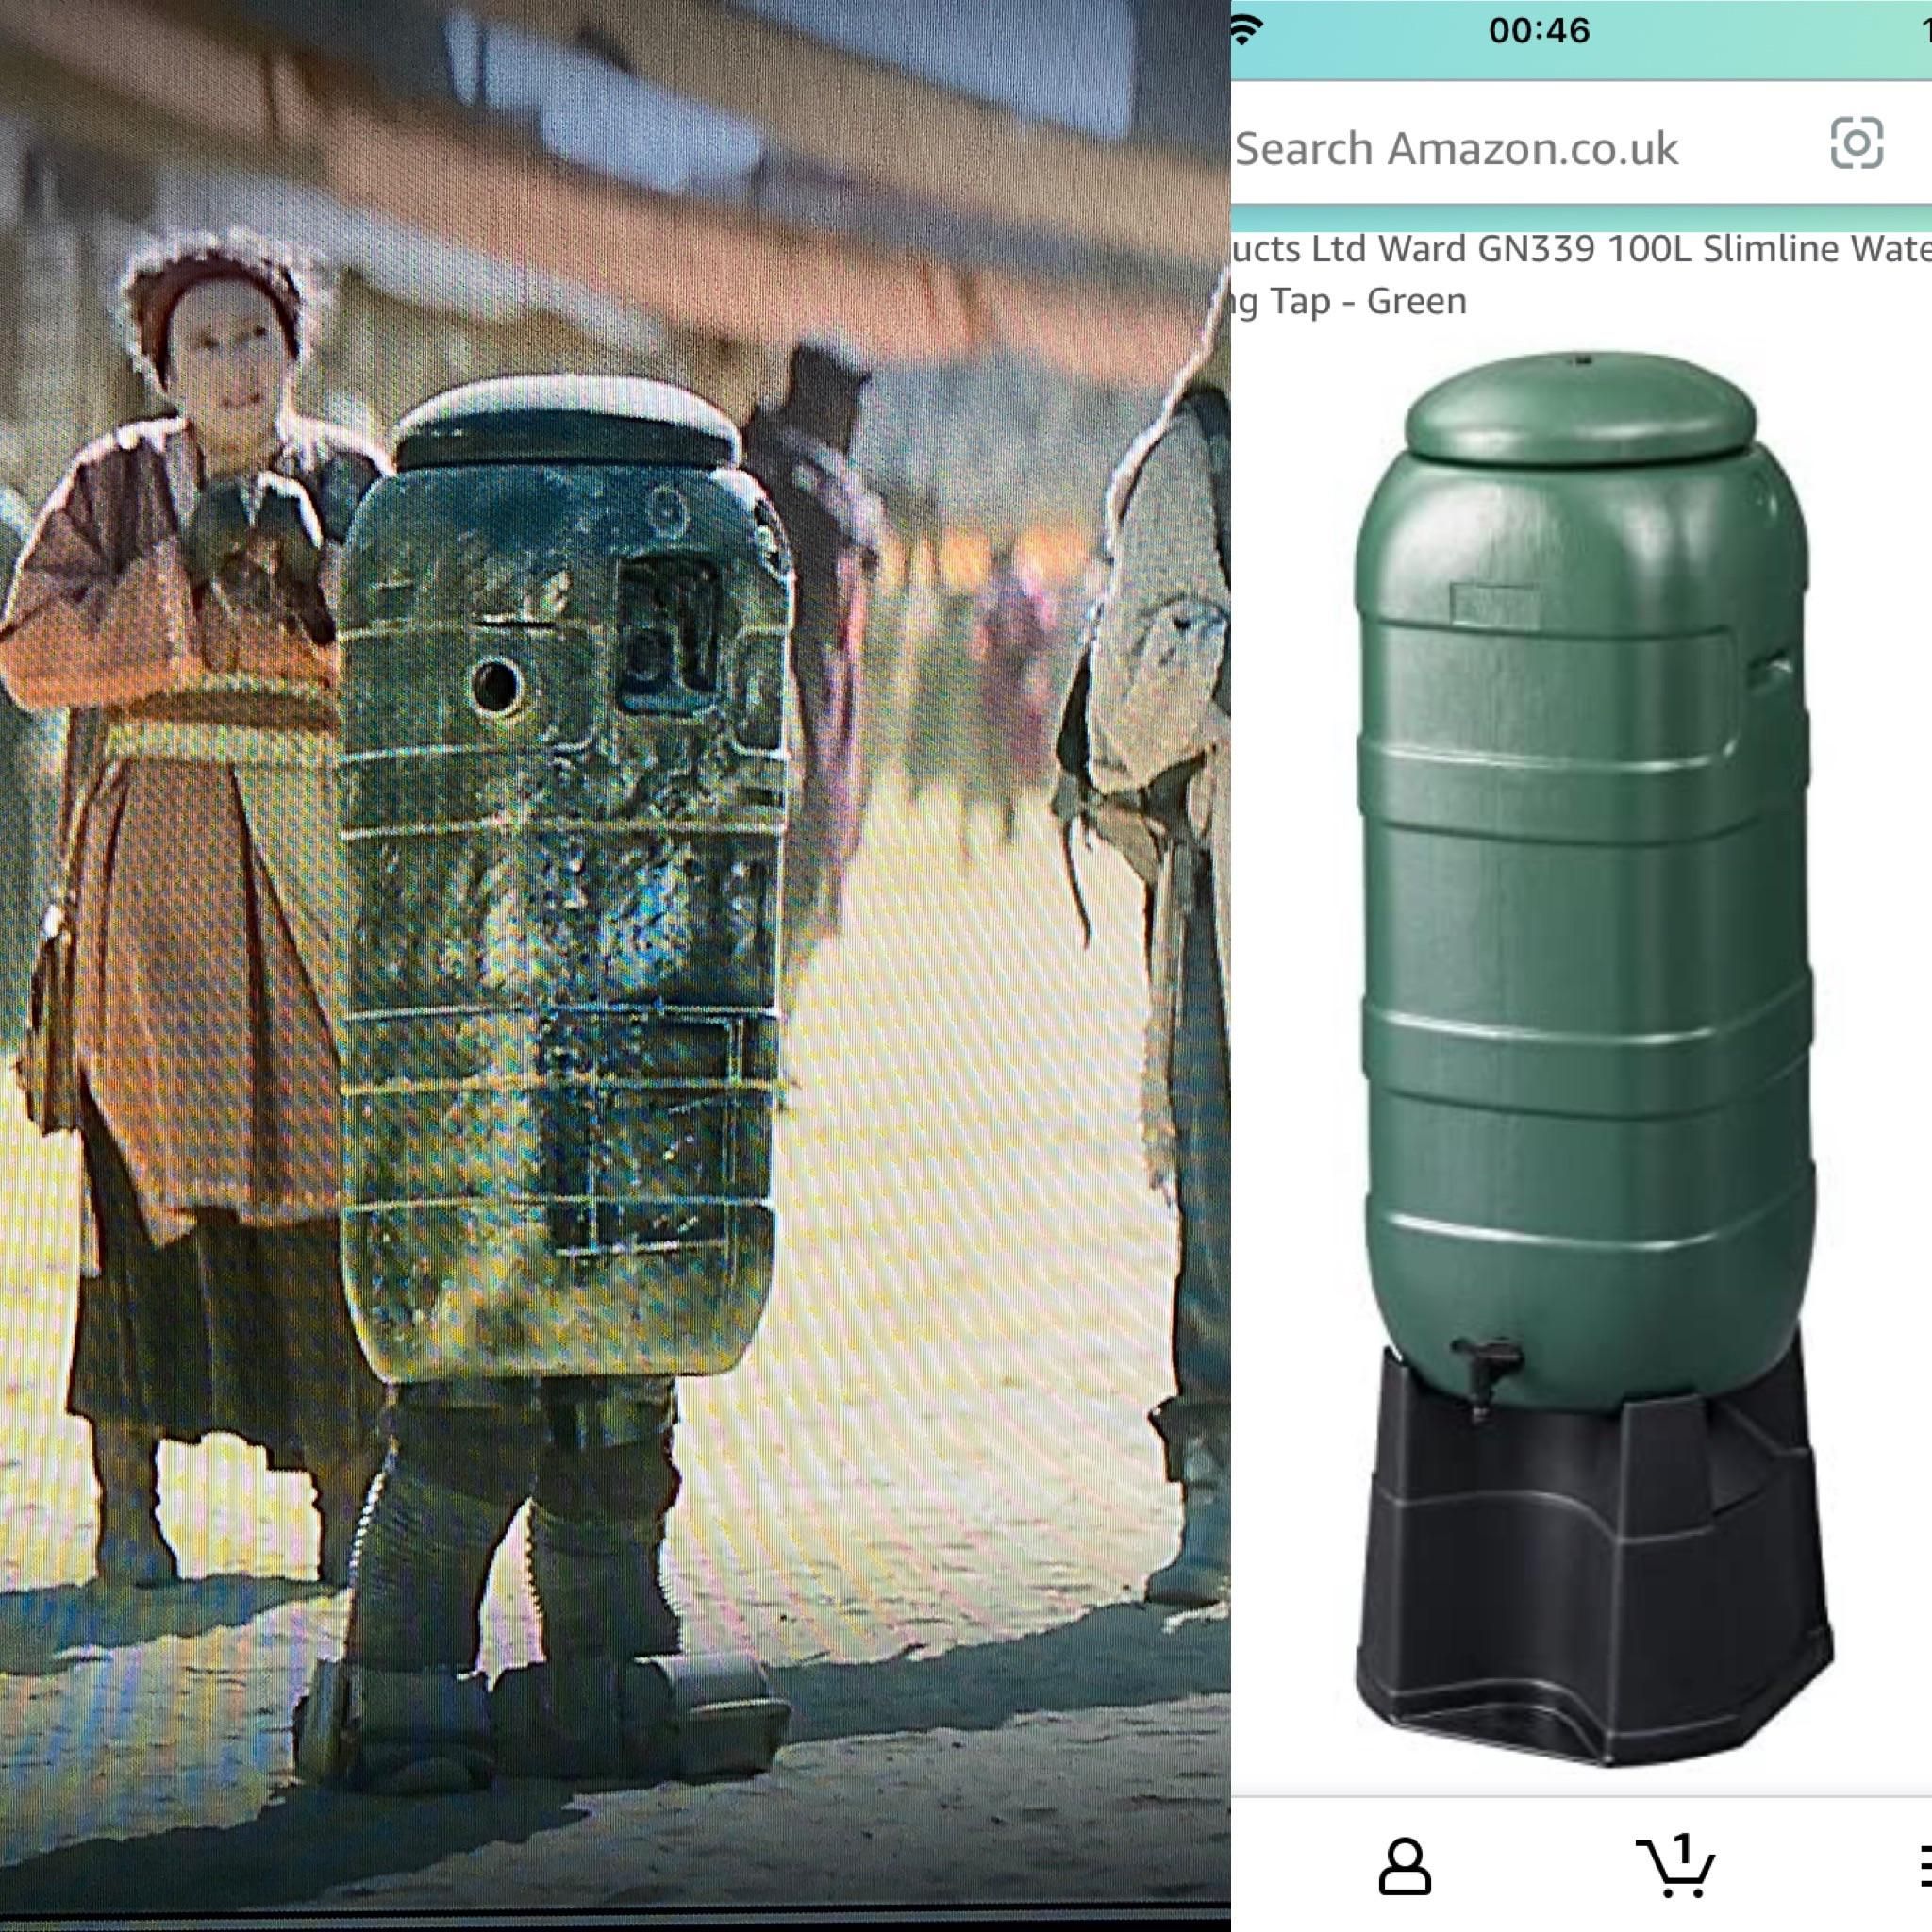 In Boba Fett, one of the droids is a grown man in a rain barrel. This is in reference to Star Wars fans who cry buckets of tears every time a new Star Wars comes out.